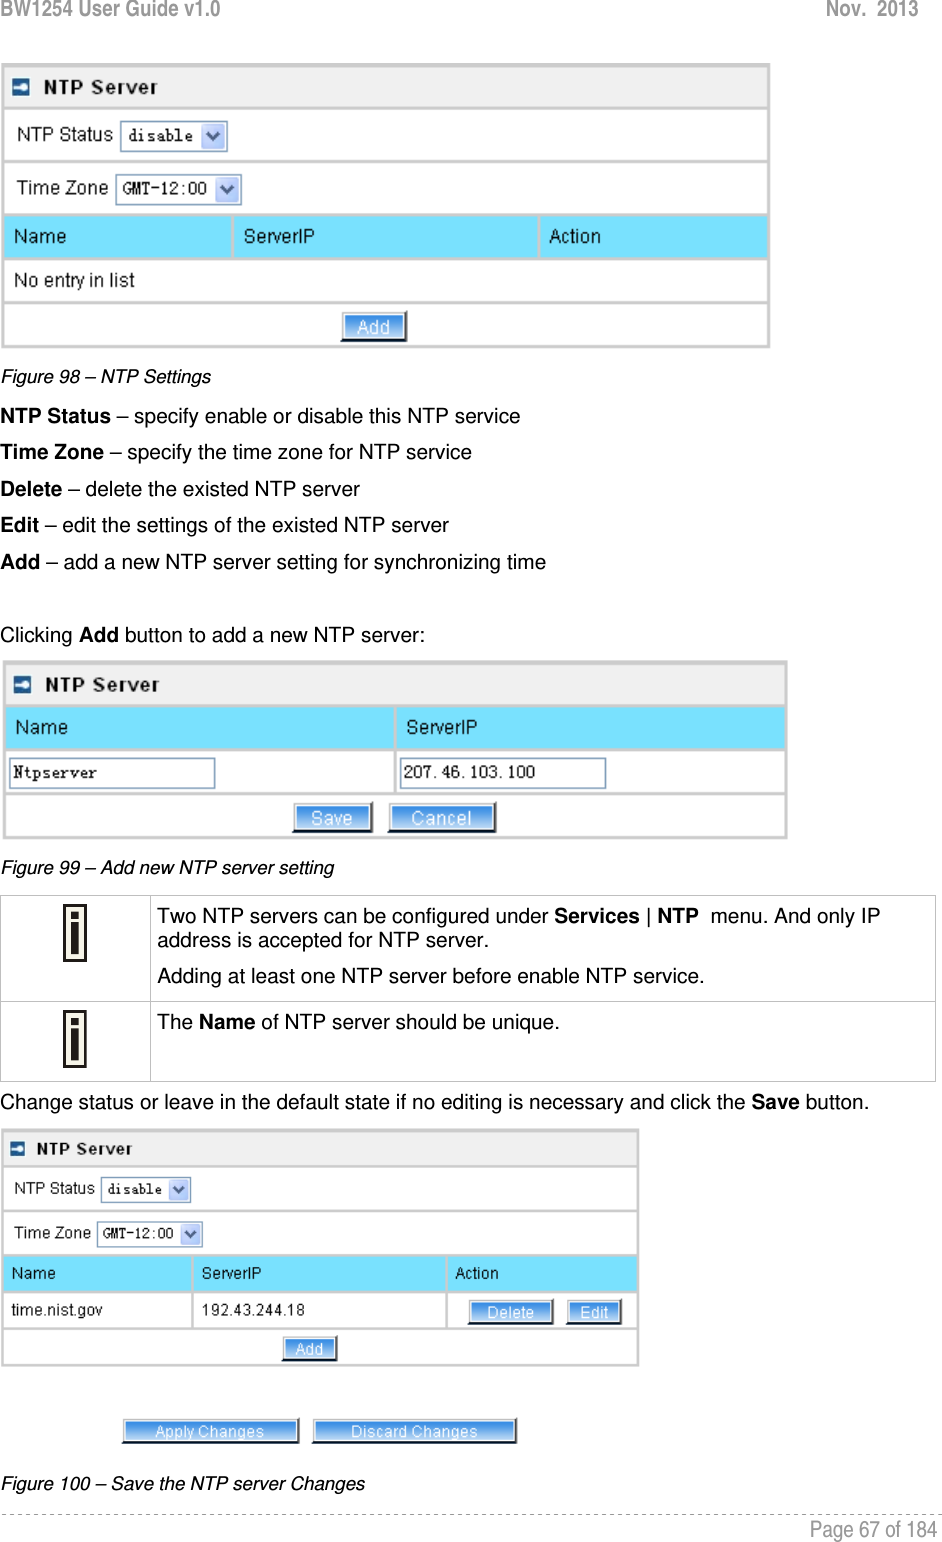 BW1254 User Guide v1.0  Nov.  2013     Page 67 of 184    Figure 98 – NTP Settings NTP Status – specify enable or disable this NTP service Time Zone – specify the time zone for NTP service Delete – delete the existed NTP server Edit – edit the settings of the existed NTP server Add – add a new NTP server setting for synchronizing time  Clicking Add button to add a new NTP server:  Figure 99 – Add new NTP server setting  Two NTP servers can be configured under Services | NTP  menu. And only IP address is accepted for NTP server. Adding at least one NTP server before enable NTP service.  The Name of NTP server should be unique. Change status or leave in the default state if no editing is necessary and click the Save button.  Figure 100 – Save the NTP server Changes 